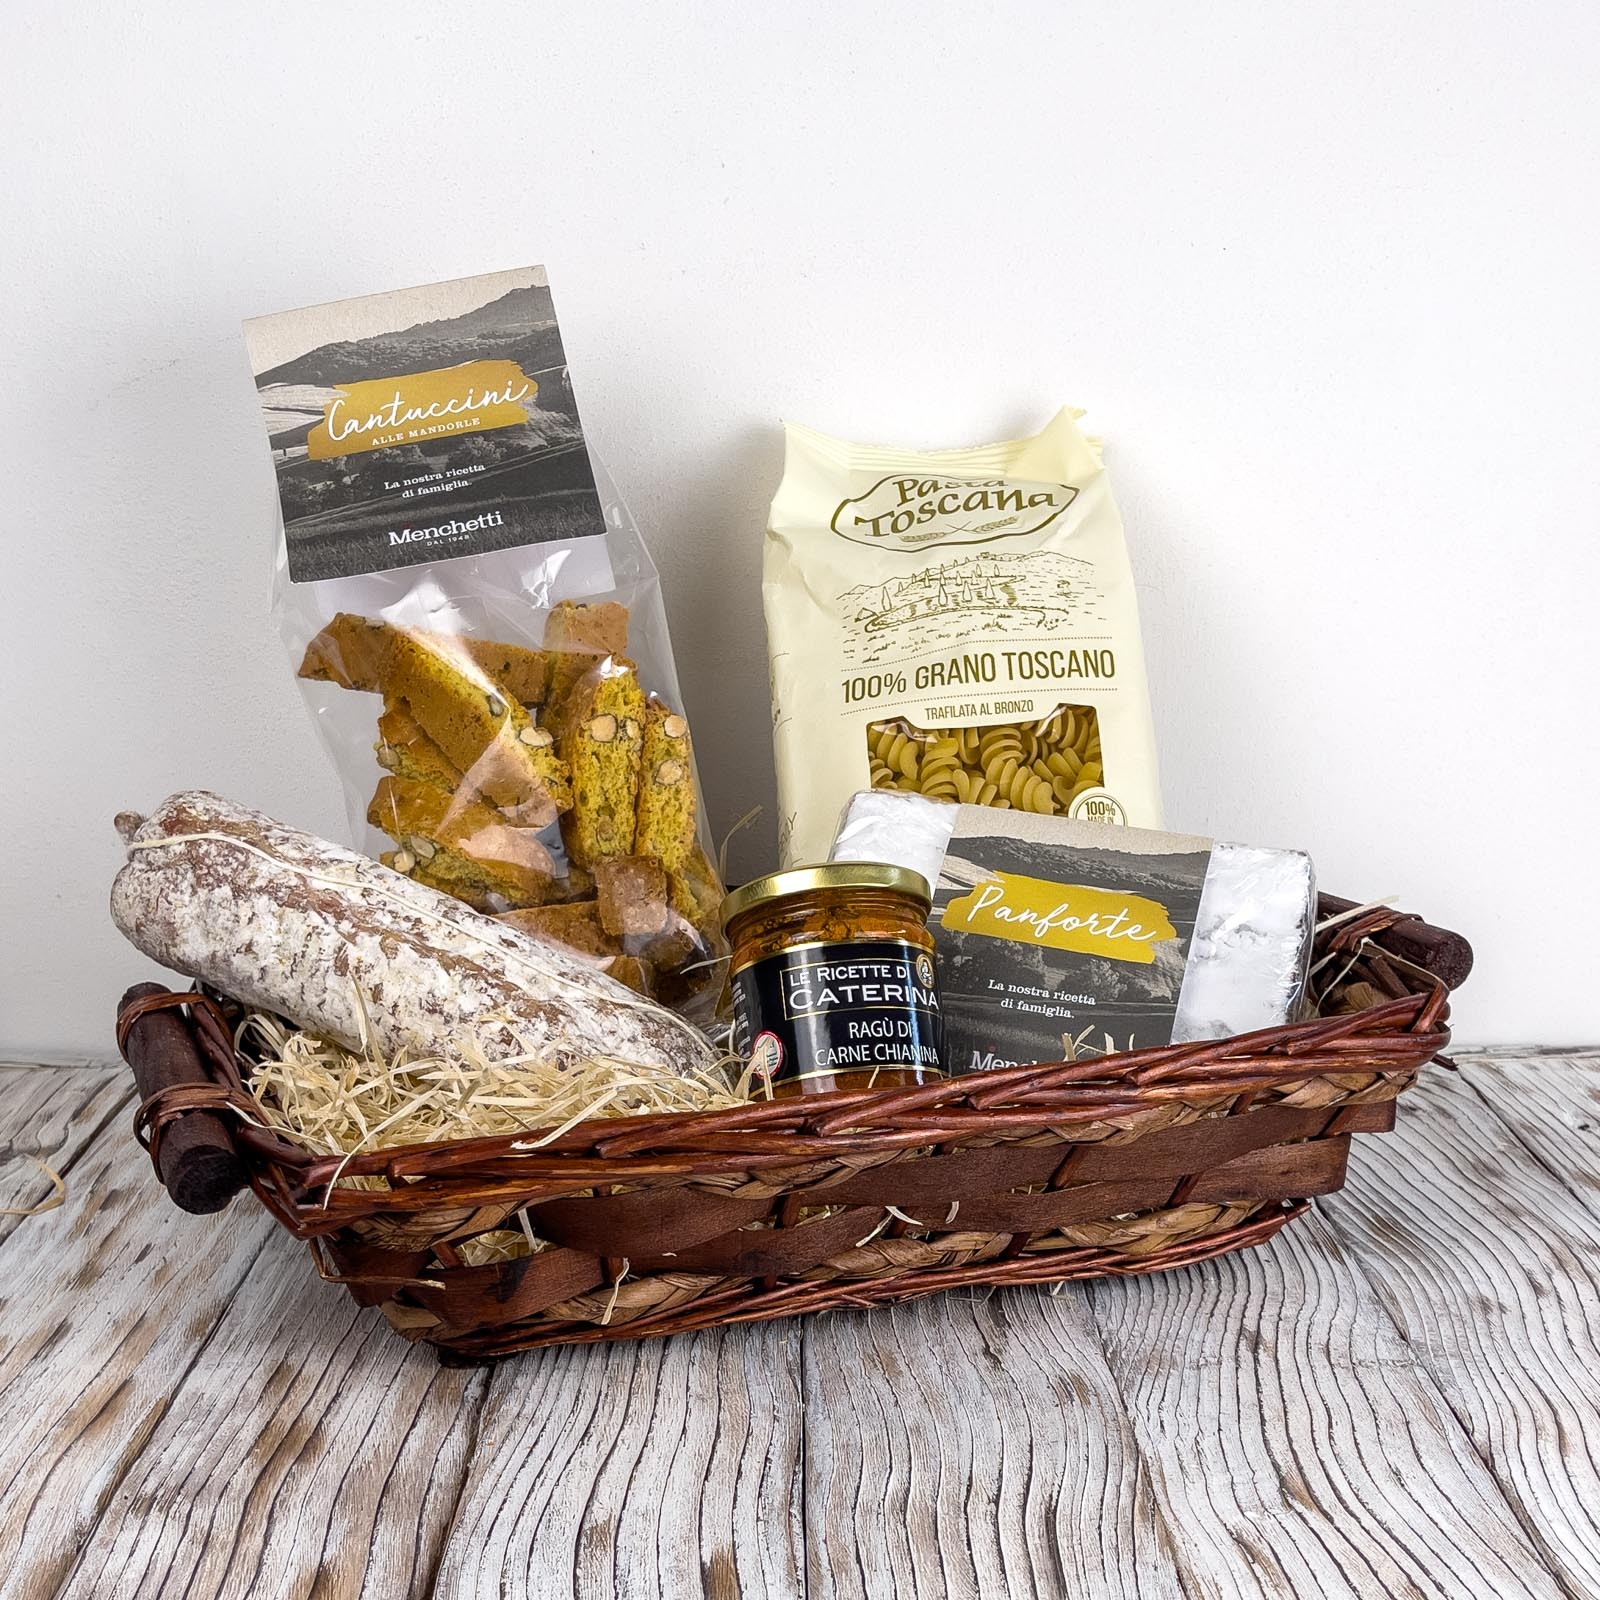 Gift Hamper consisting of a selection of 5 products for a total of about 2 kg. We will pack the basket and ship it wherever you want, there is also the possibility of adding a personalized card with a message.
For more information or product changes contact us in chat.